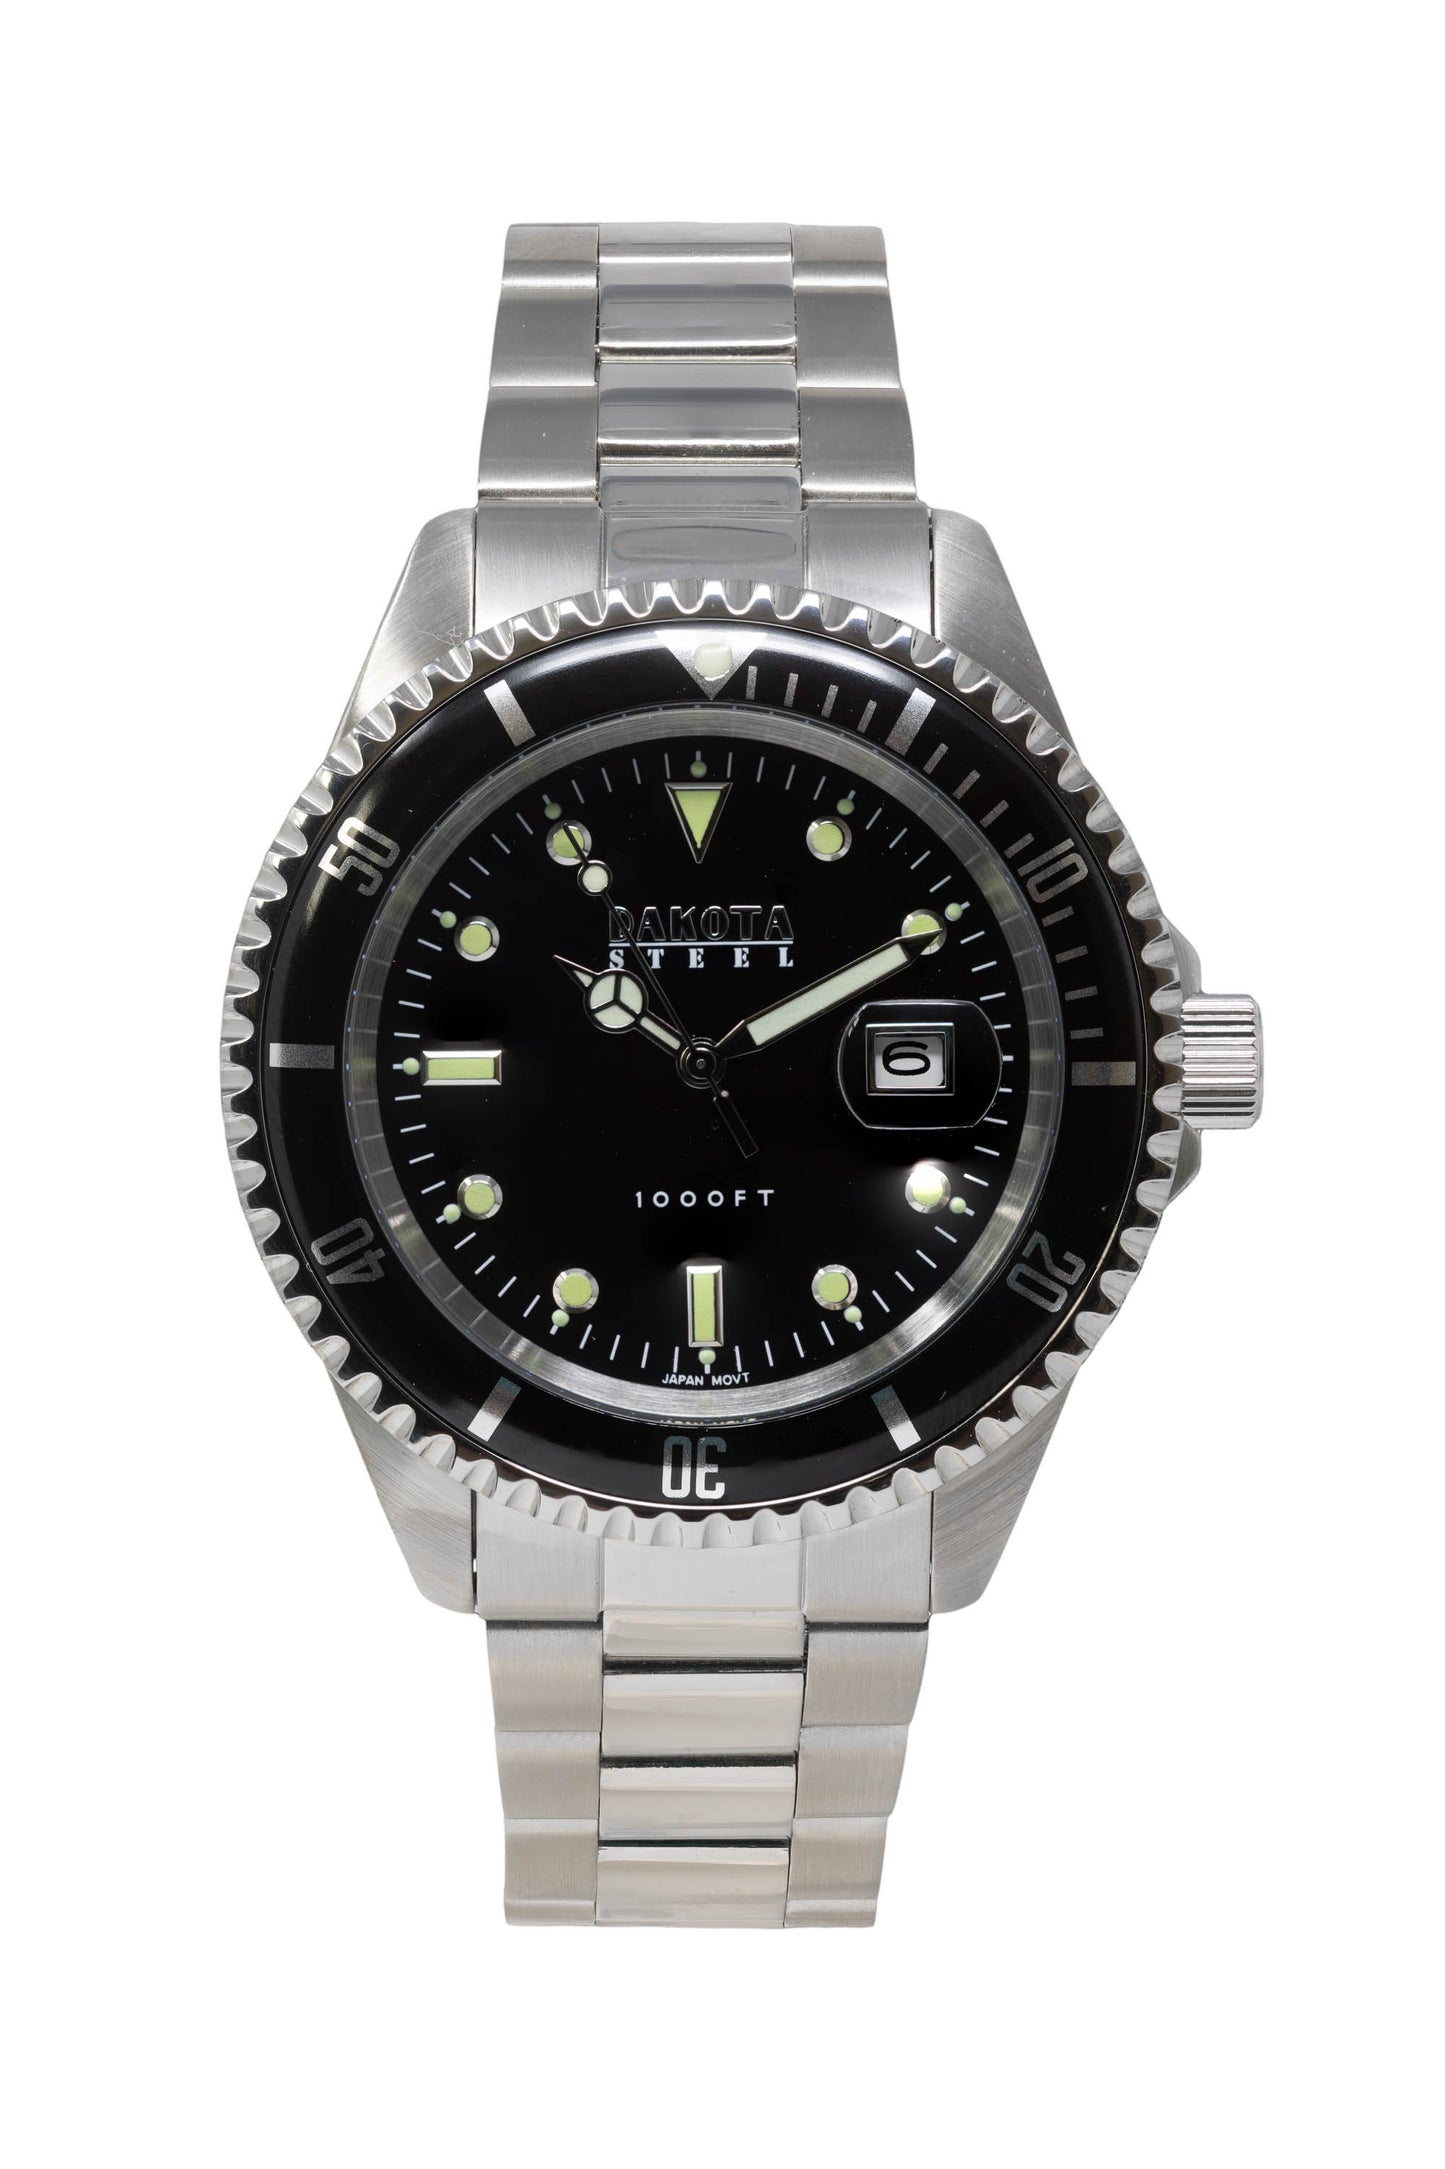 SS1000 - 42mm - Stainless Steel - Black Dial